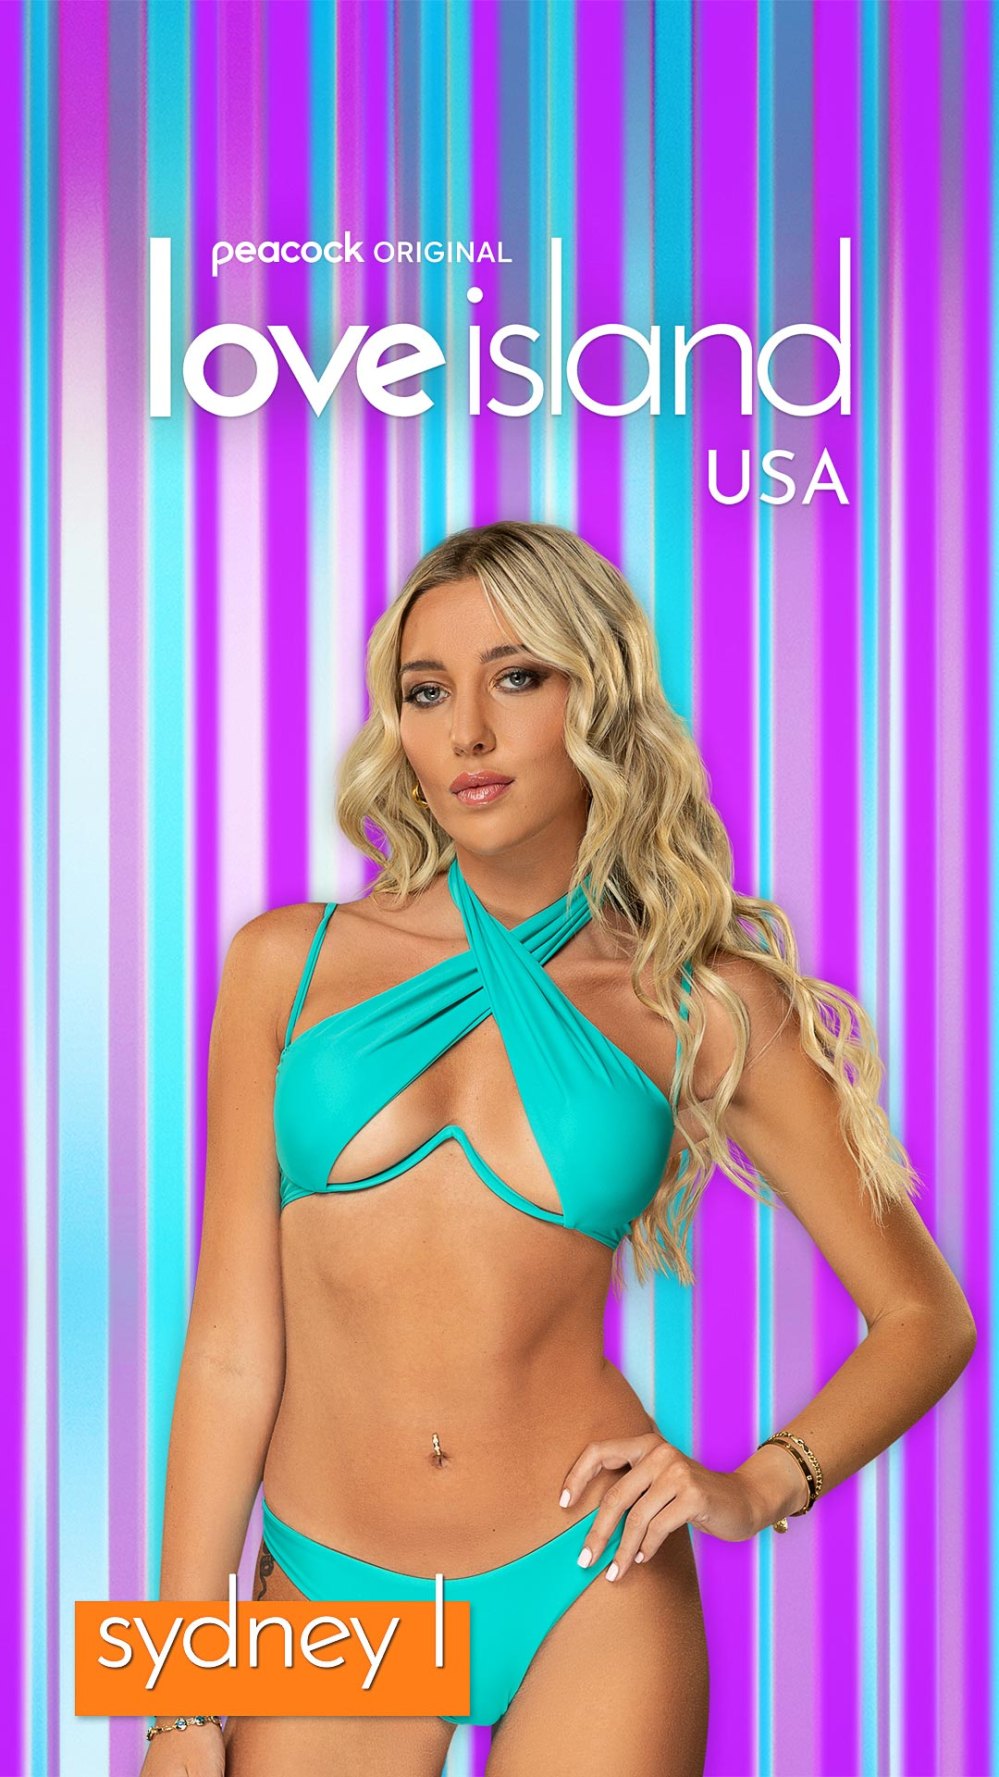 Meet the new Love Island USA Season 6 Bombs Are Coming to Casa Amor LoveIsland_S6_SYDNEY L_CharacterPortrait_1080x1920_Text 125